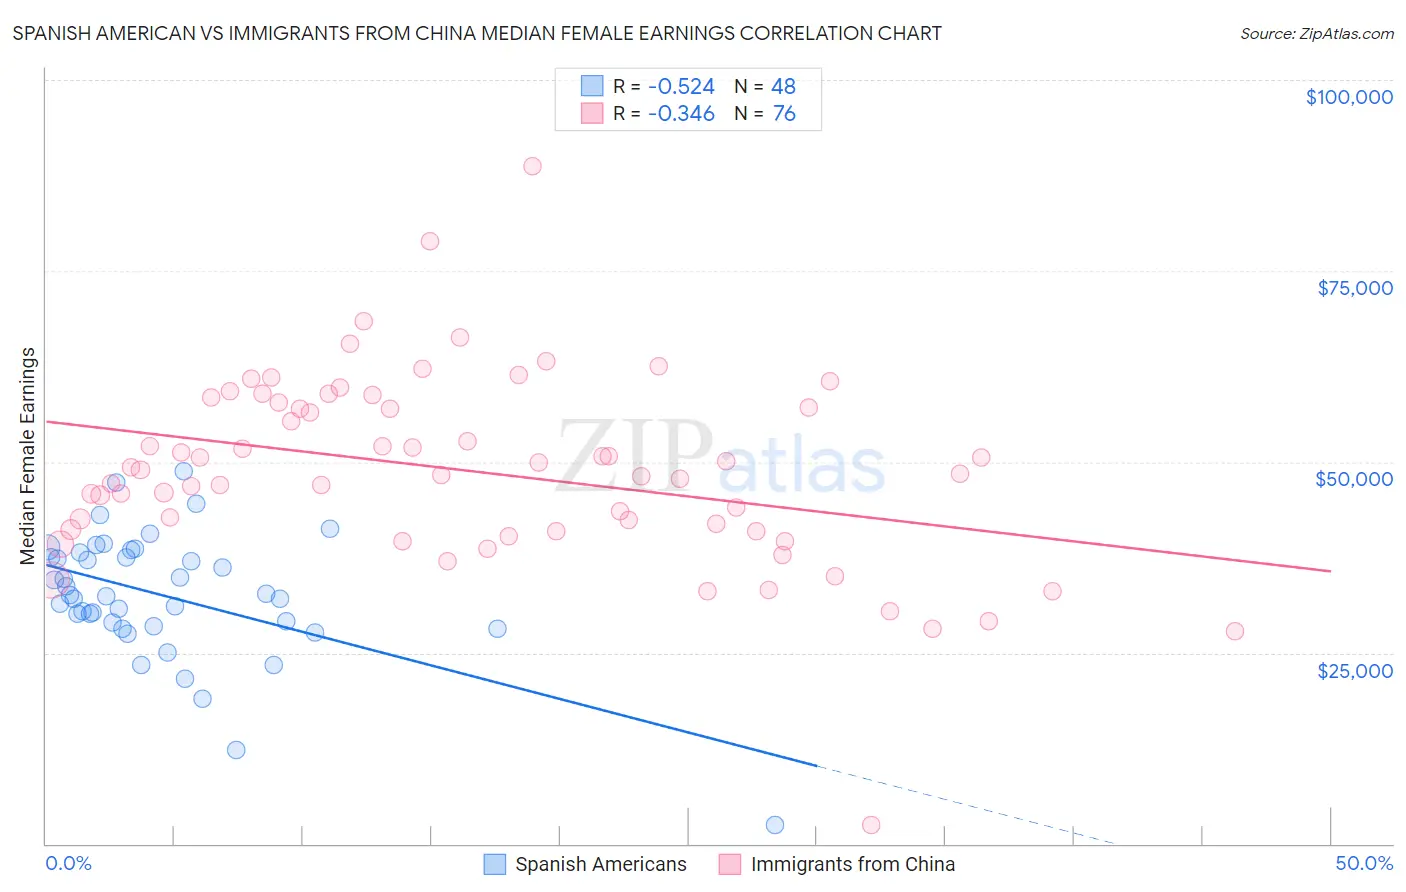 Spanish American vs Immigrants from China Median Female Earnings